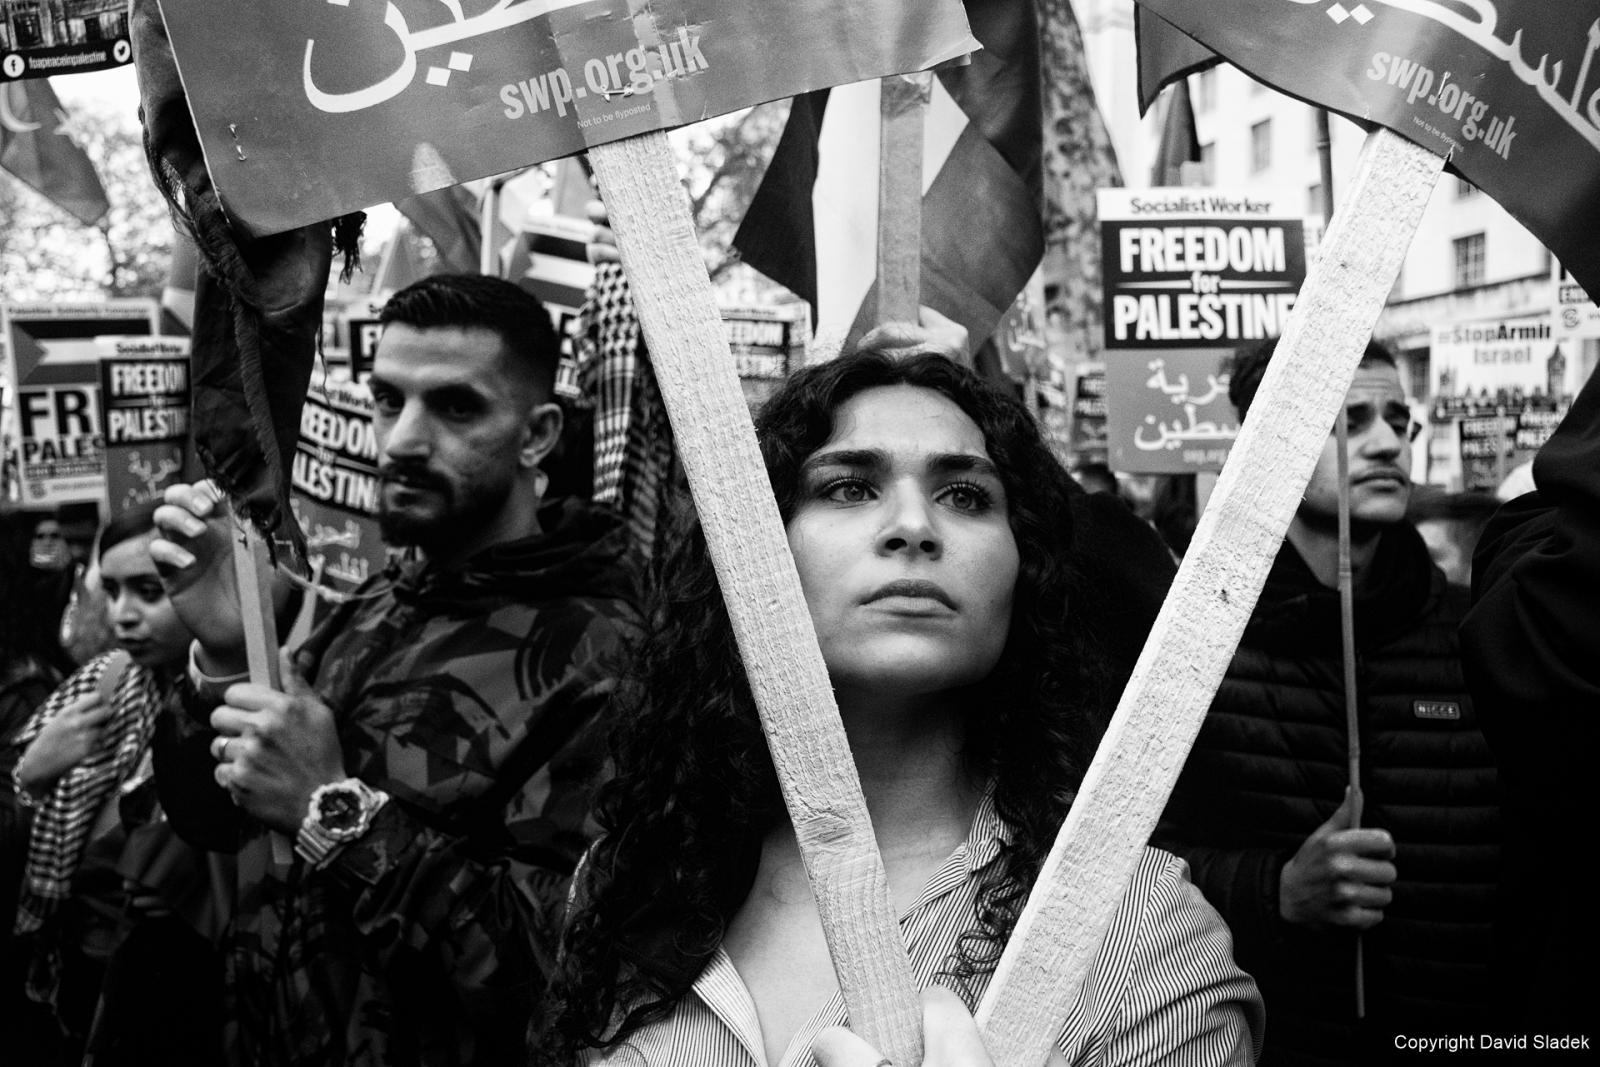 From #FreePalestine / #SaveSheikhJarrah protest against evictions of Palestinians from East Jerusalem, London, 11/05/2021